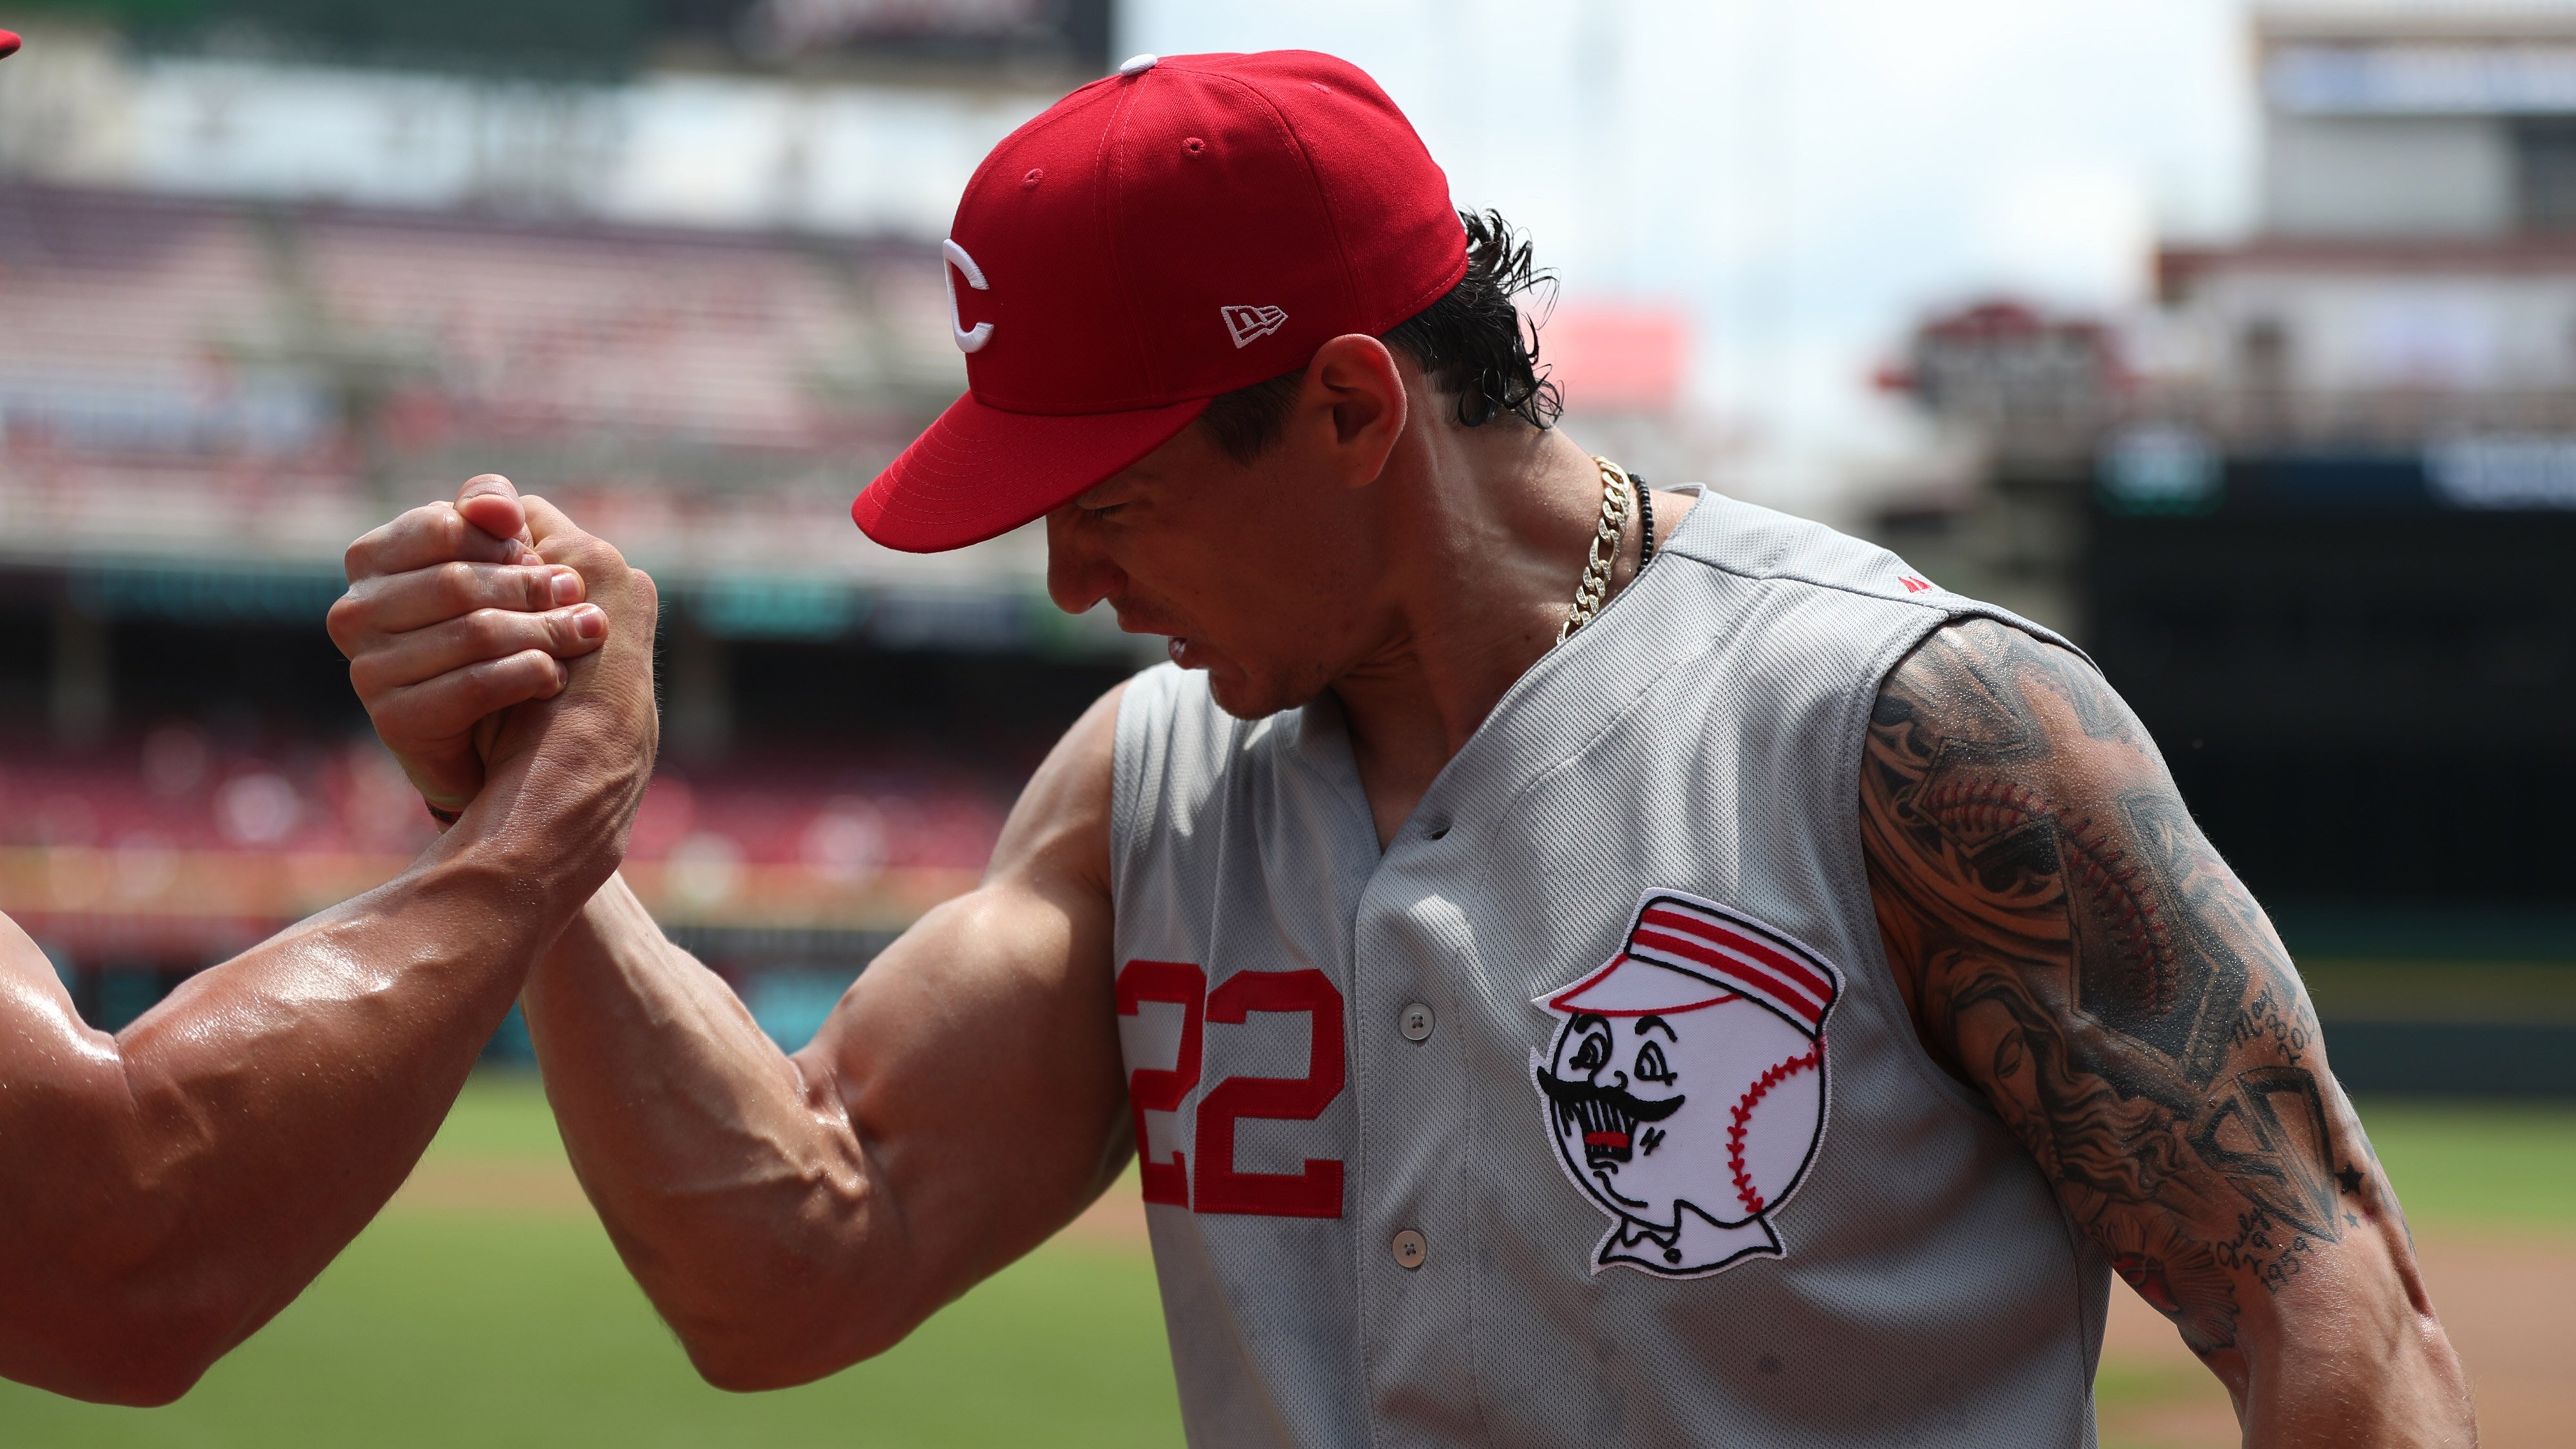 MLB The Show on X: Could you pull off the @Reds sleeveless jersey